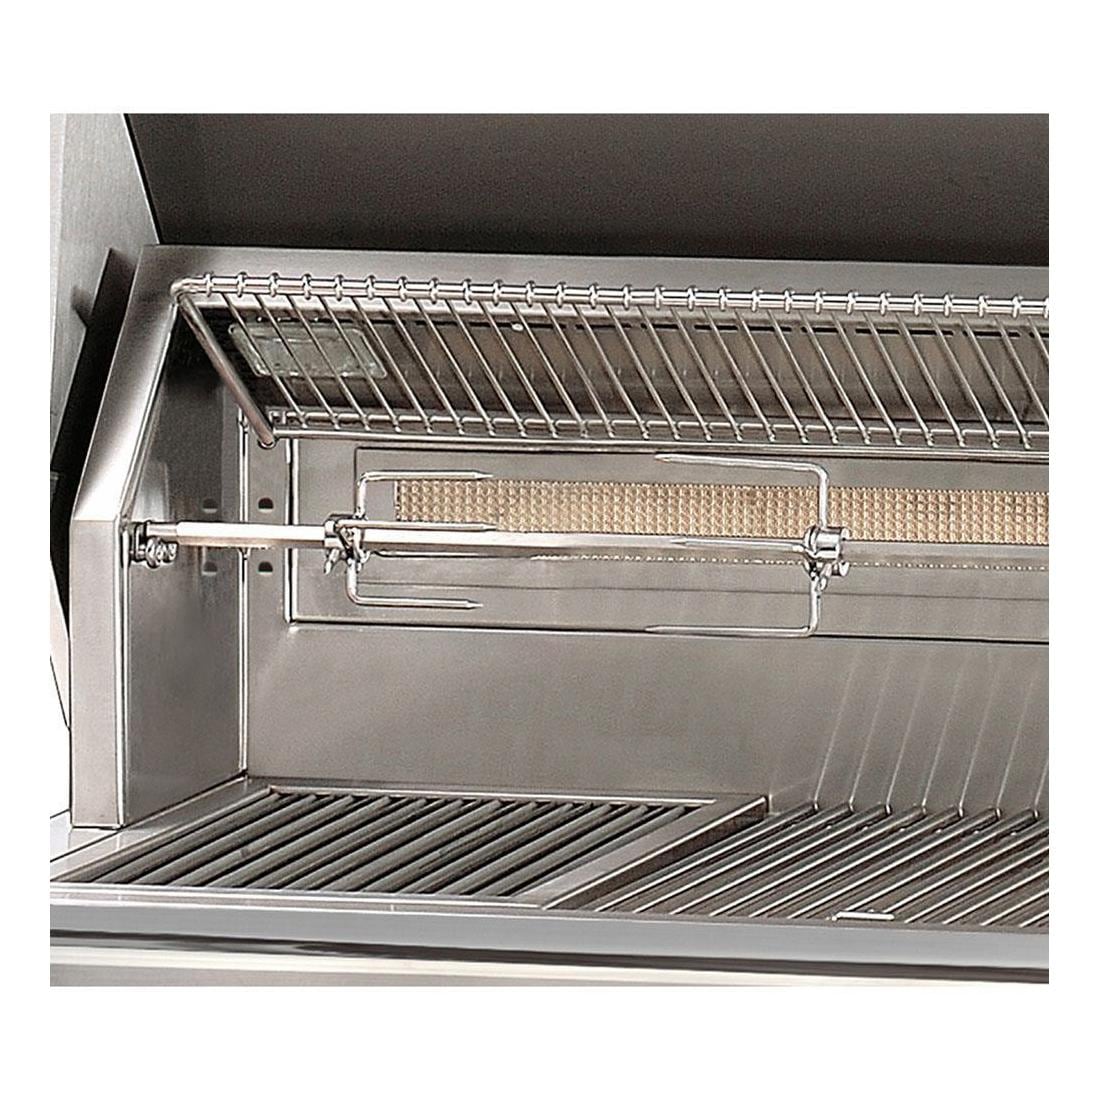 Alfresco ALXE 36-Inch Built-In Natural Gas Grill With Rotisserie in Signal White Matte